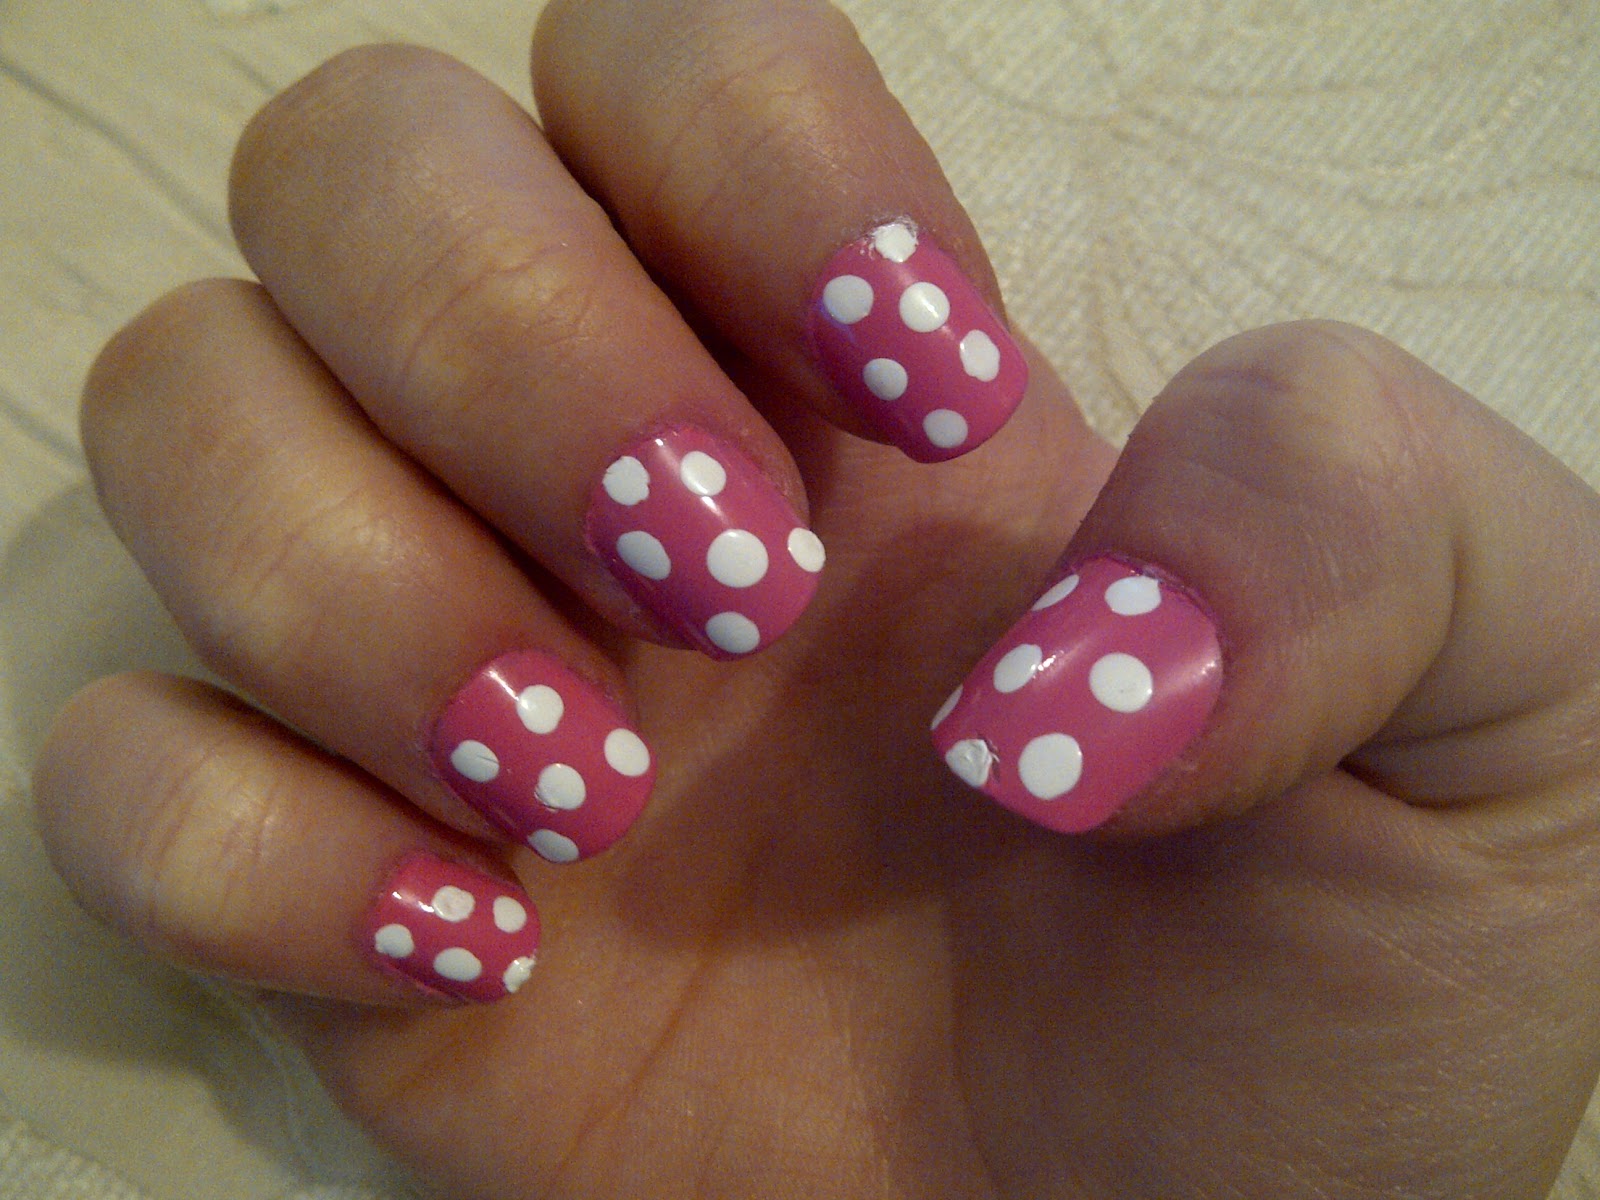 3. Cute Minnie Mouse Gel Nails - wide 8